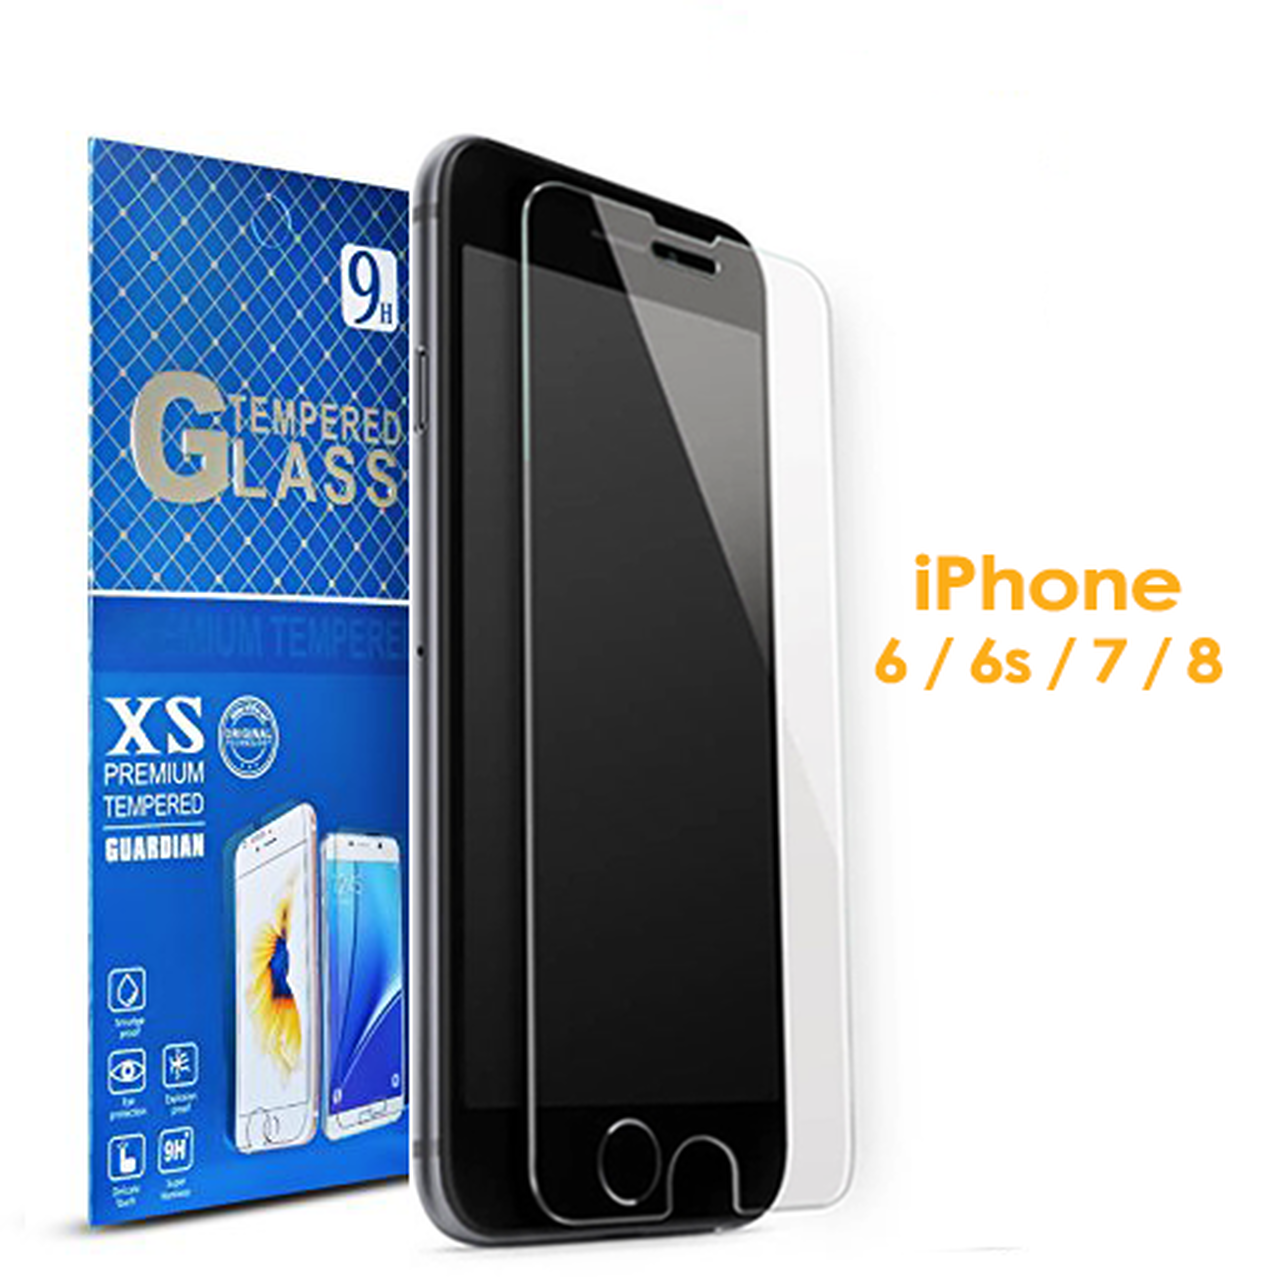 Tempered Glass - 20% OFF ( $7.99 )